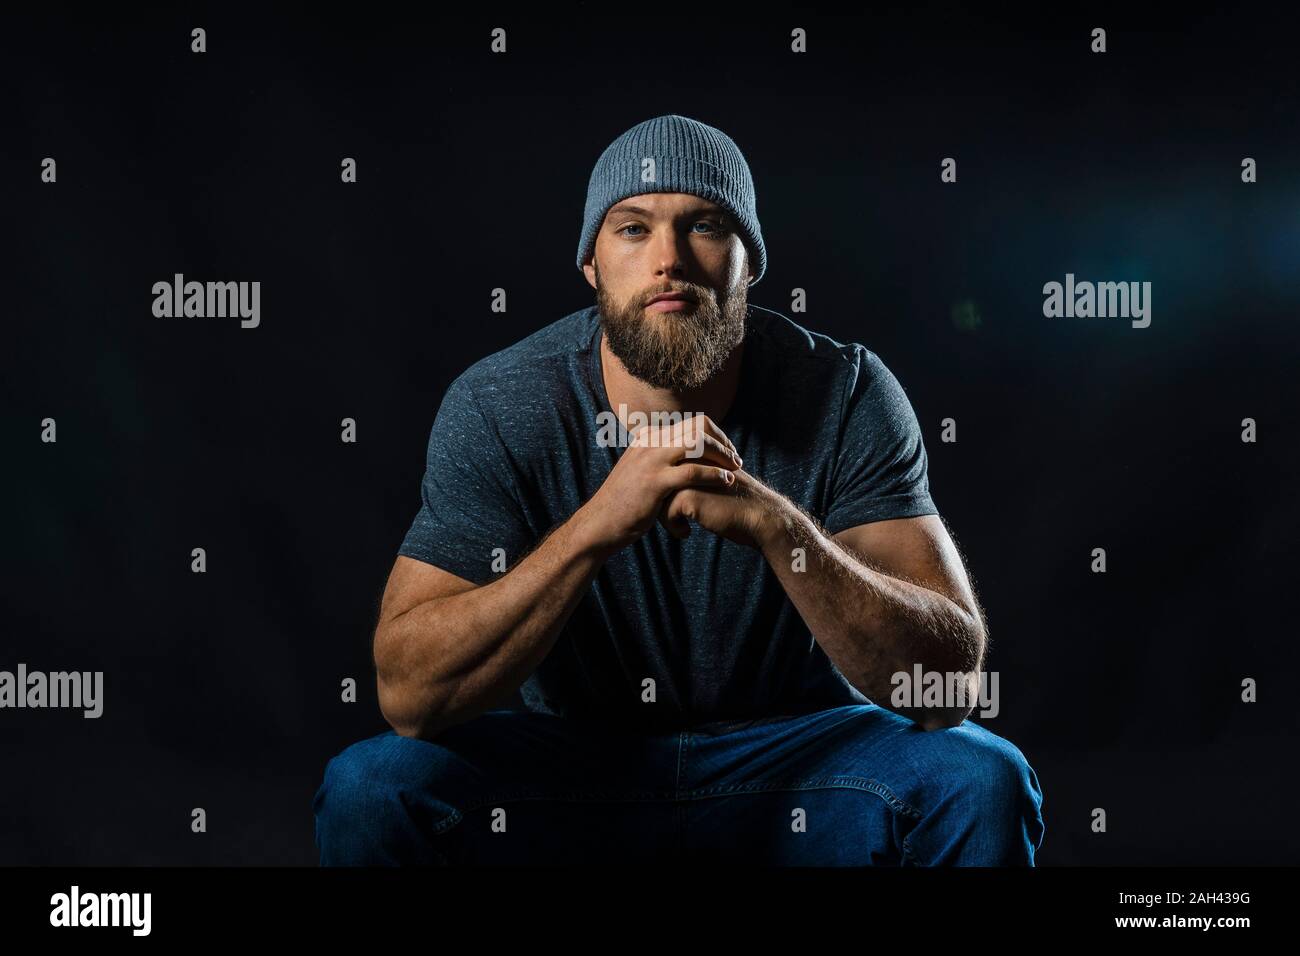 Portrait of a muscular man sitting in studio Stock Photo